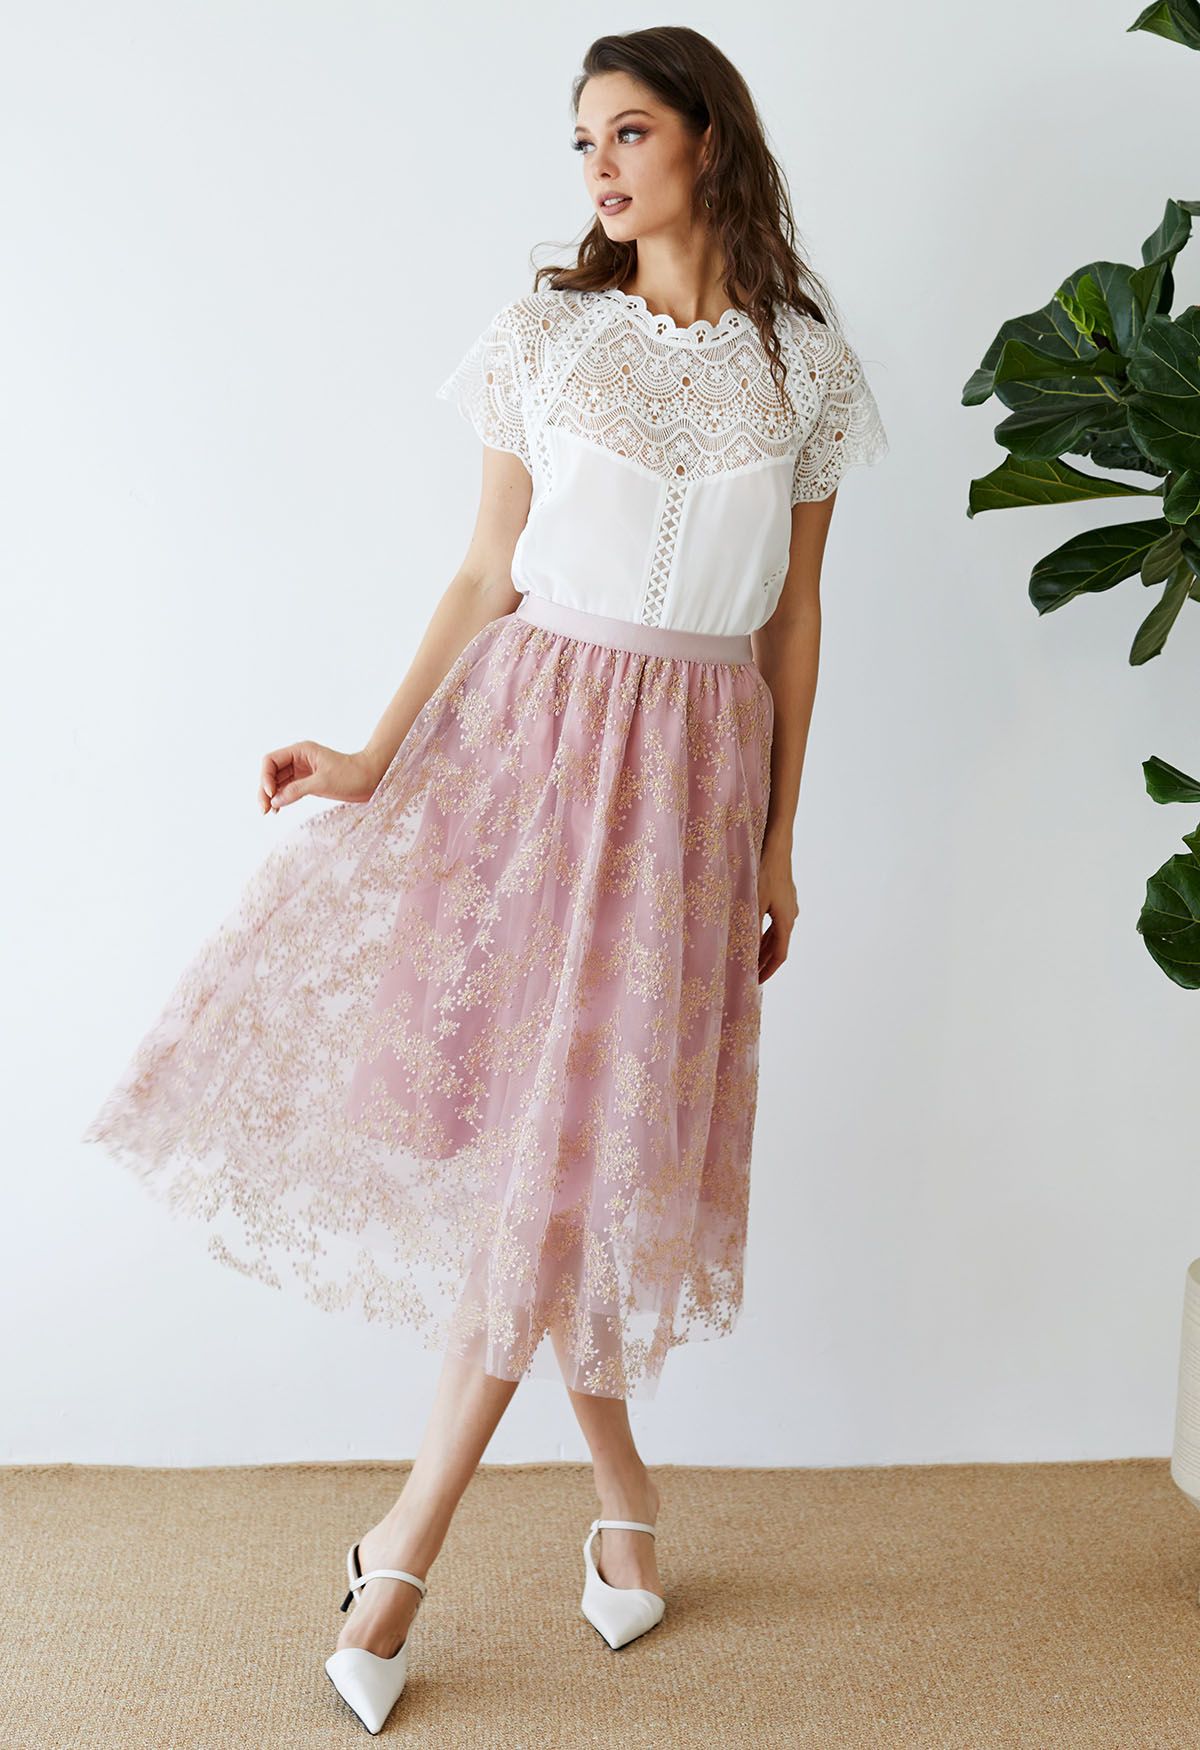 Scallop Lace Panelled Chiffon Top in White